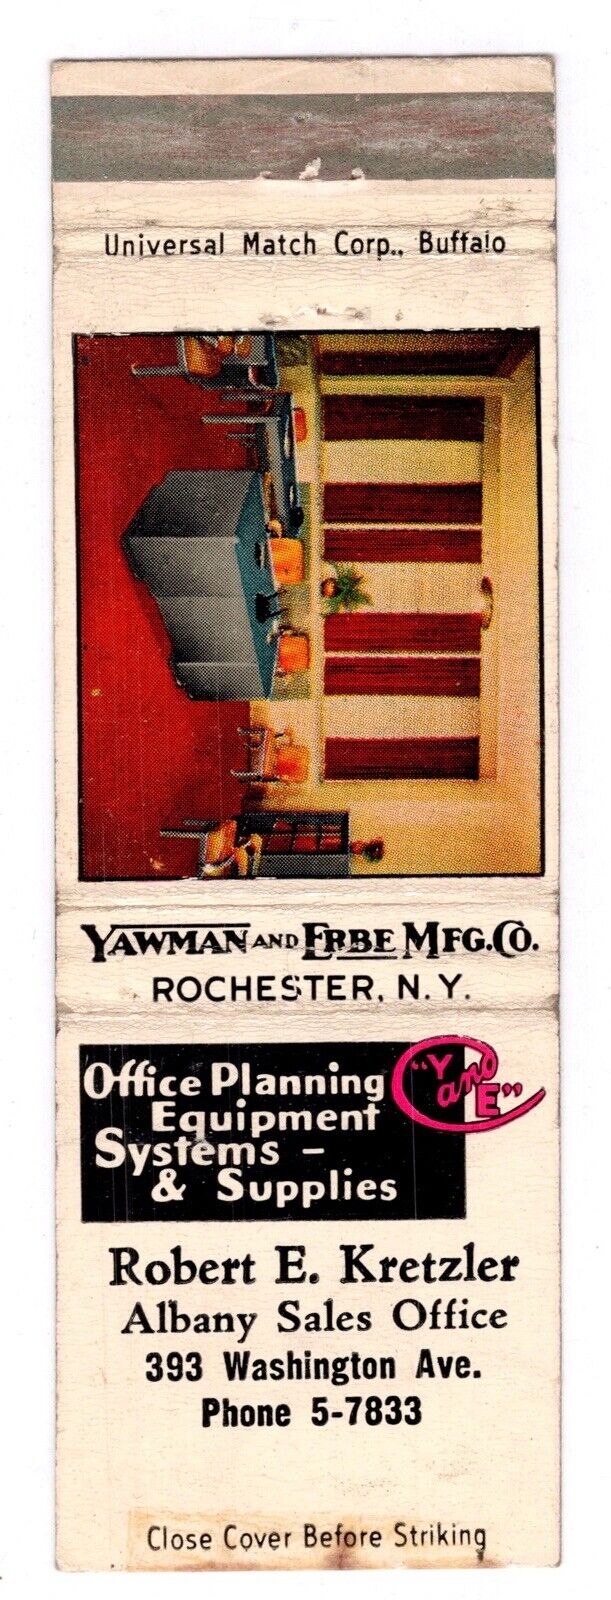 c1960s~Yawman Erbee Mfg~Furniture~Rochester New York NY~Vintage Matchbook Cover